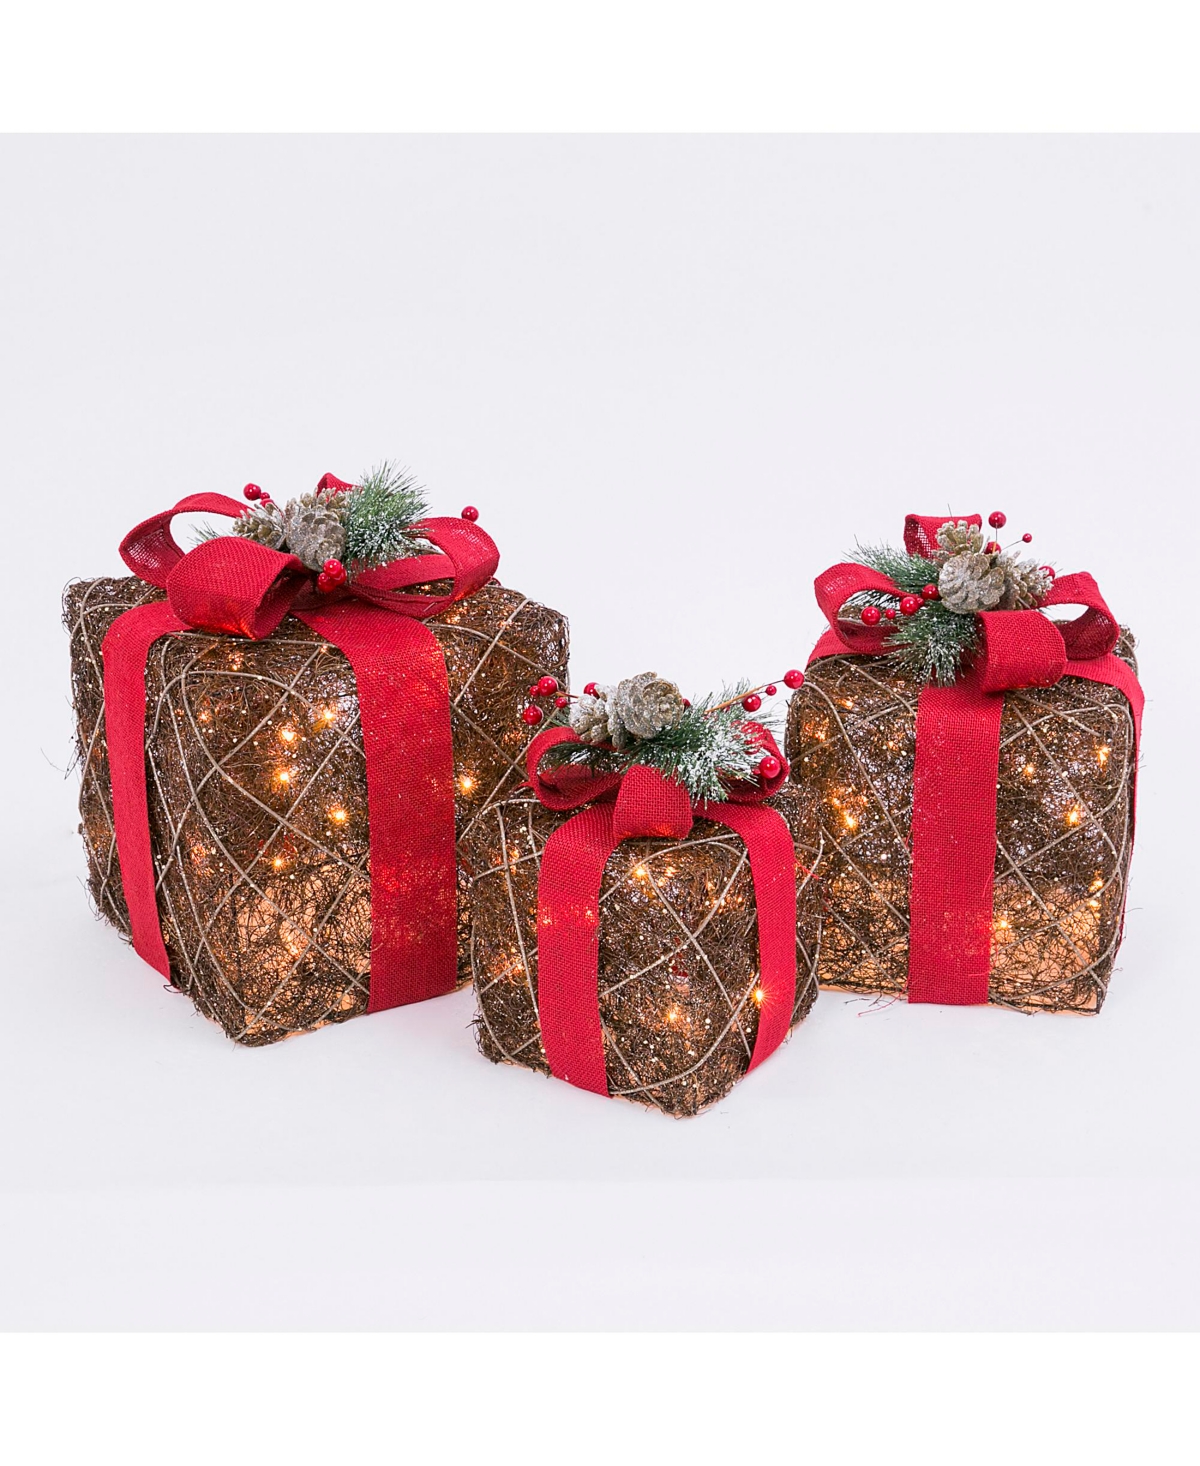 Assorted Electric Gift Boxes with Natural Vine with a Red Burlap Ribbon Accent - Set of 3 - Red